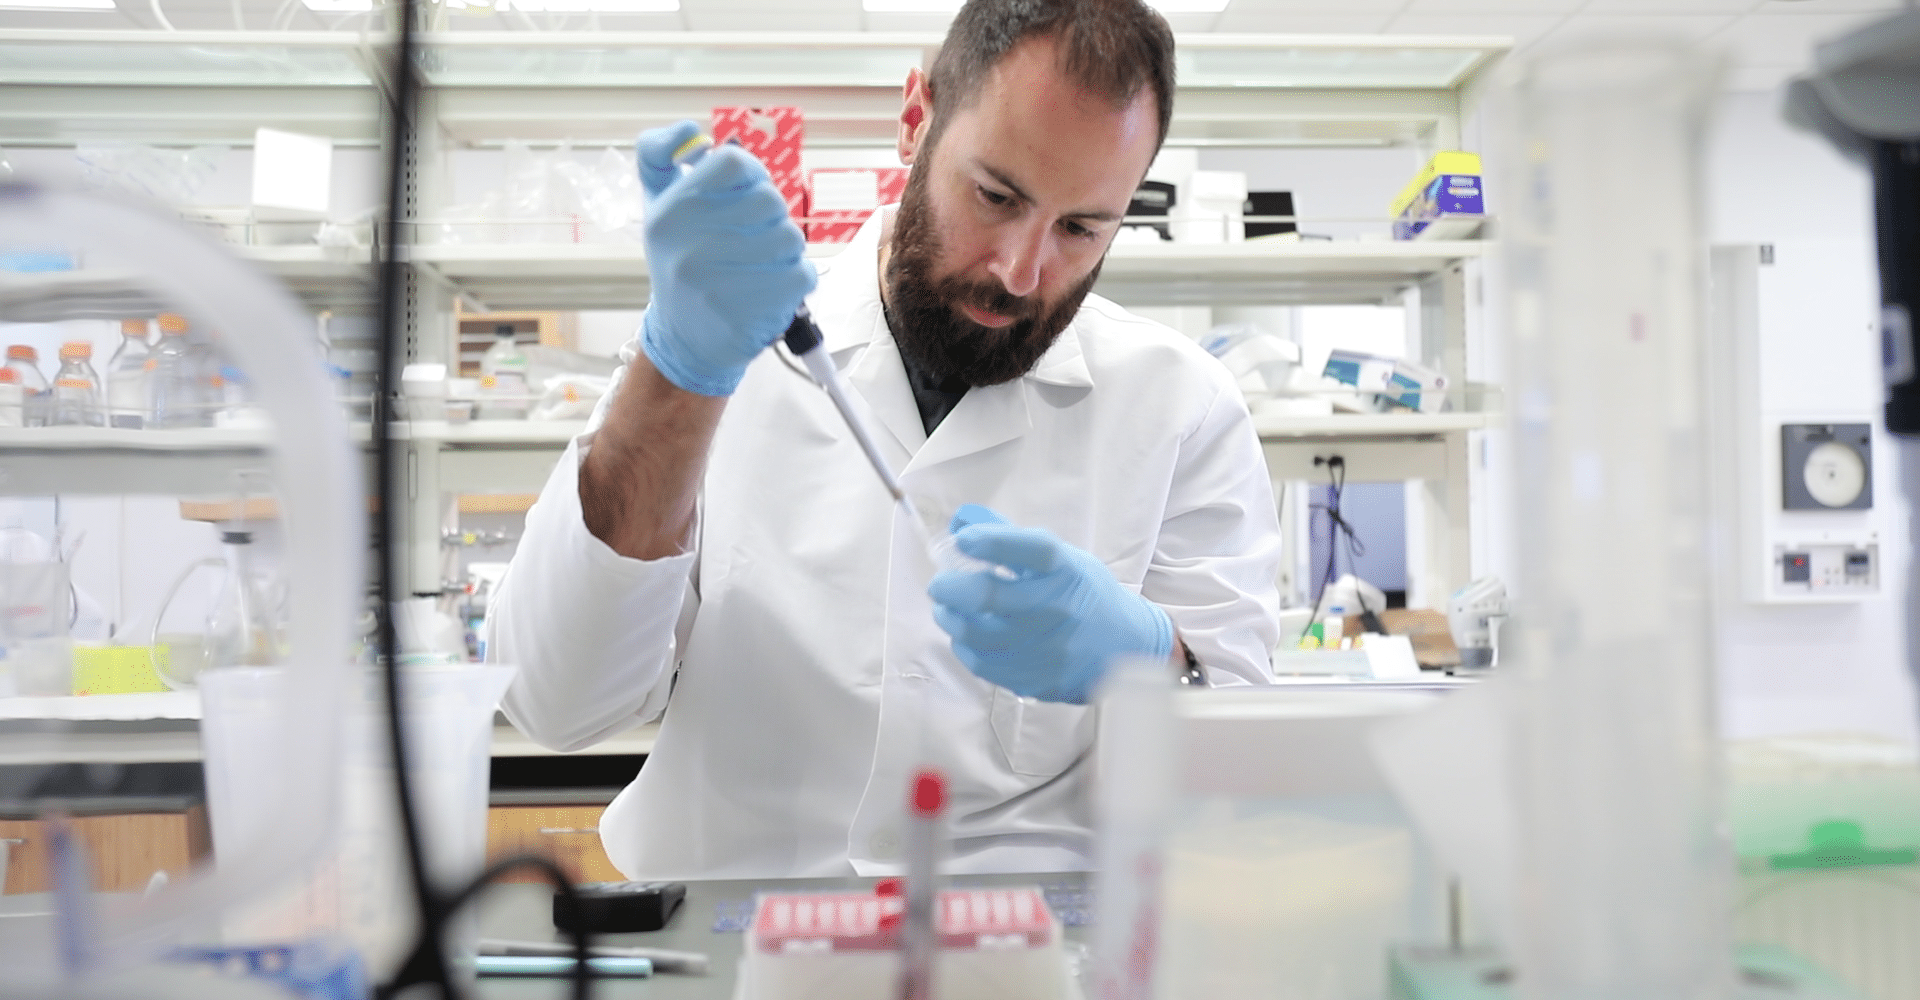 Sami Sauma, a bearded man in a white lab coat, works with research samples in a lab surrounded by shelves of materials